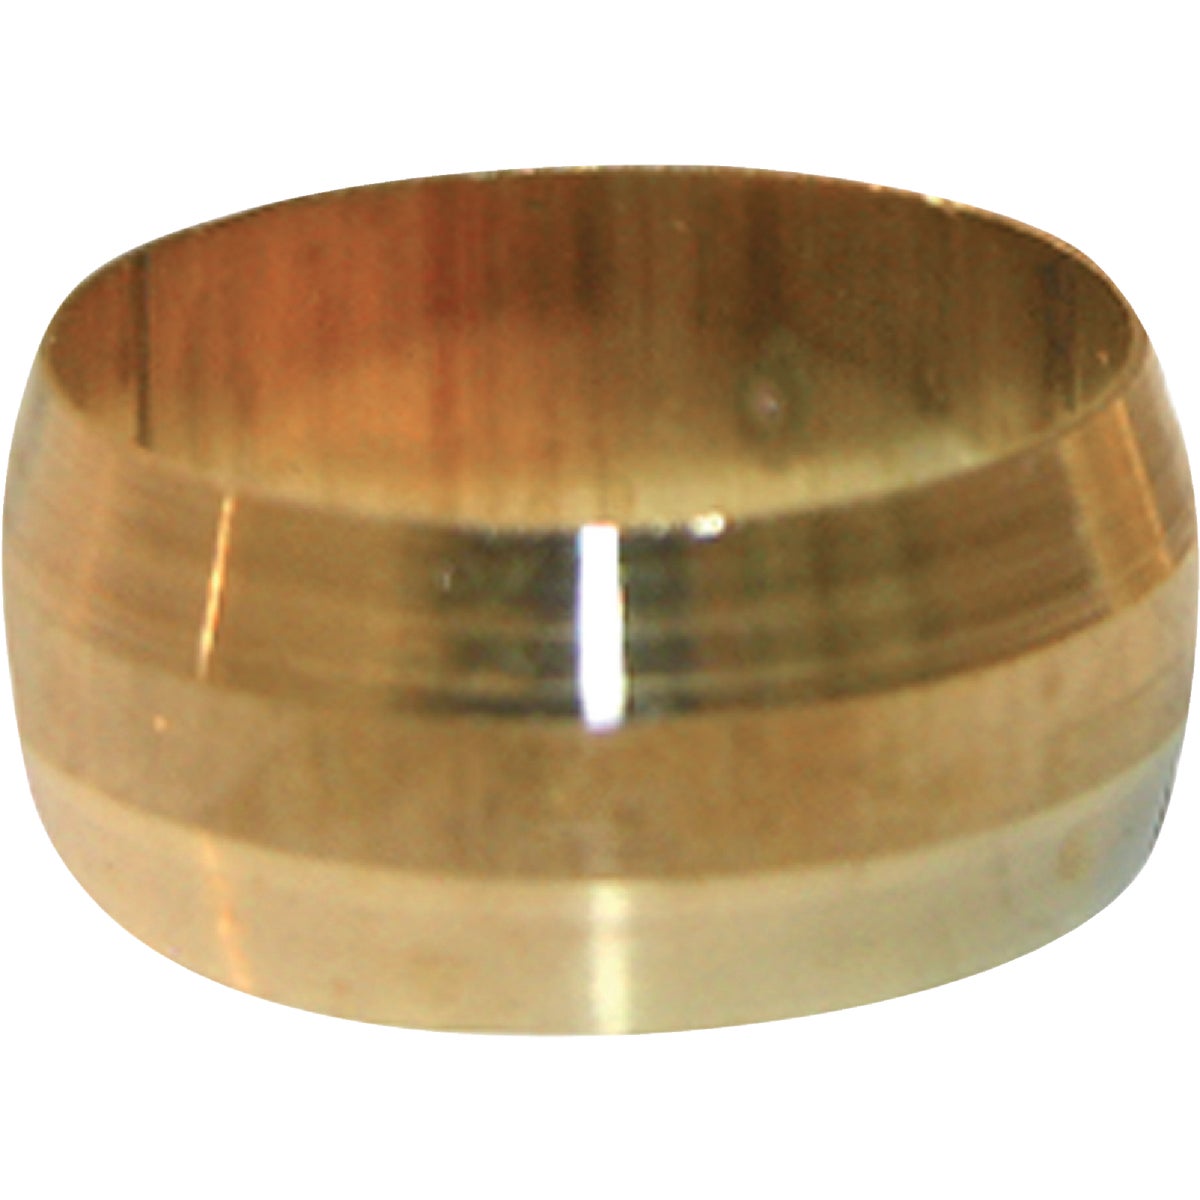 Lasco 17-6031 Lasco 3/8 In. Brass Compression Sleeve (2-Pack) 17-6031